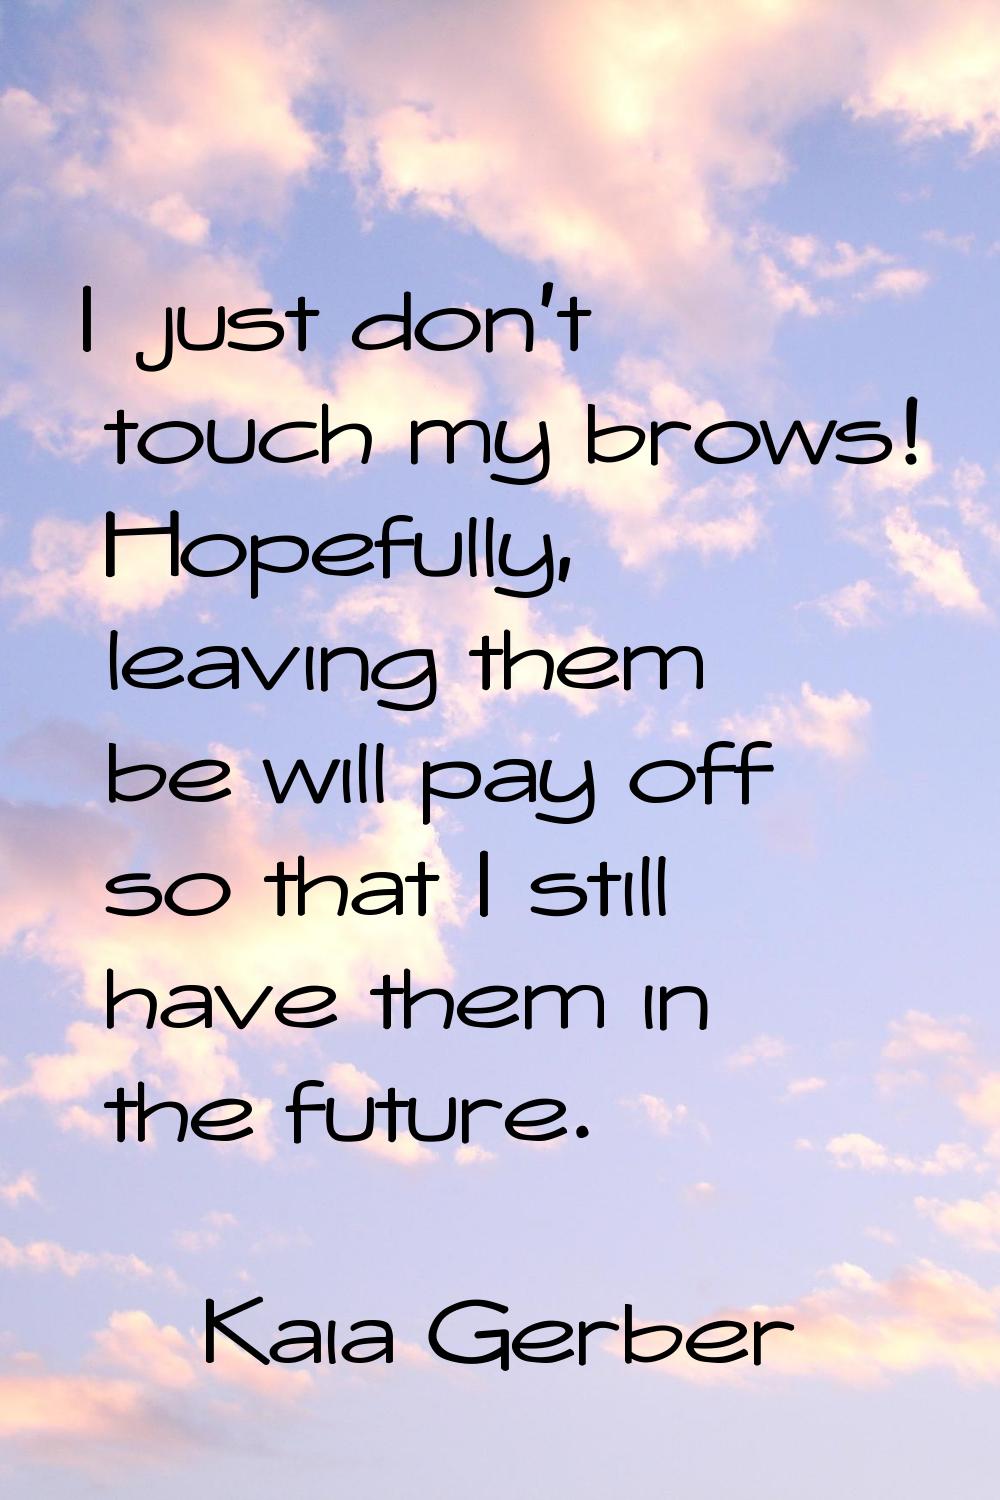 I just don't touch my brows! Hopefully, leaving them be will pay off so that I still have them in t